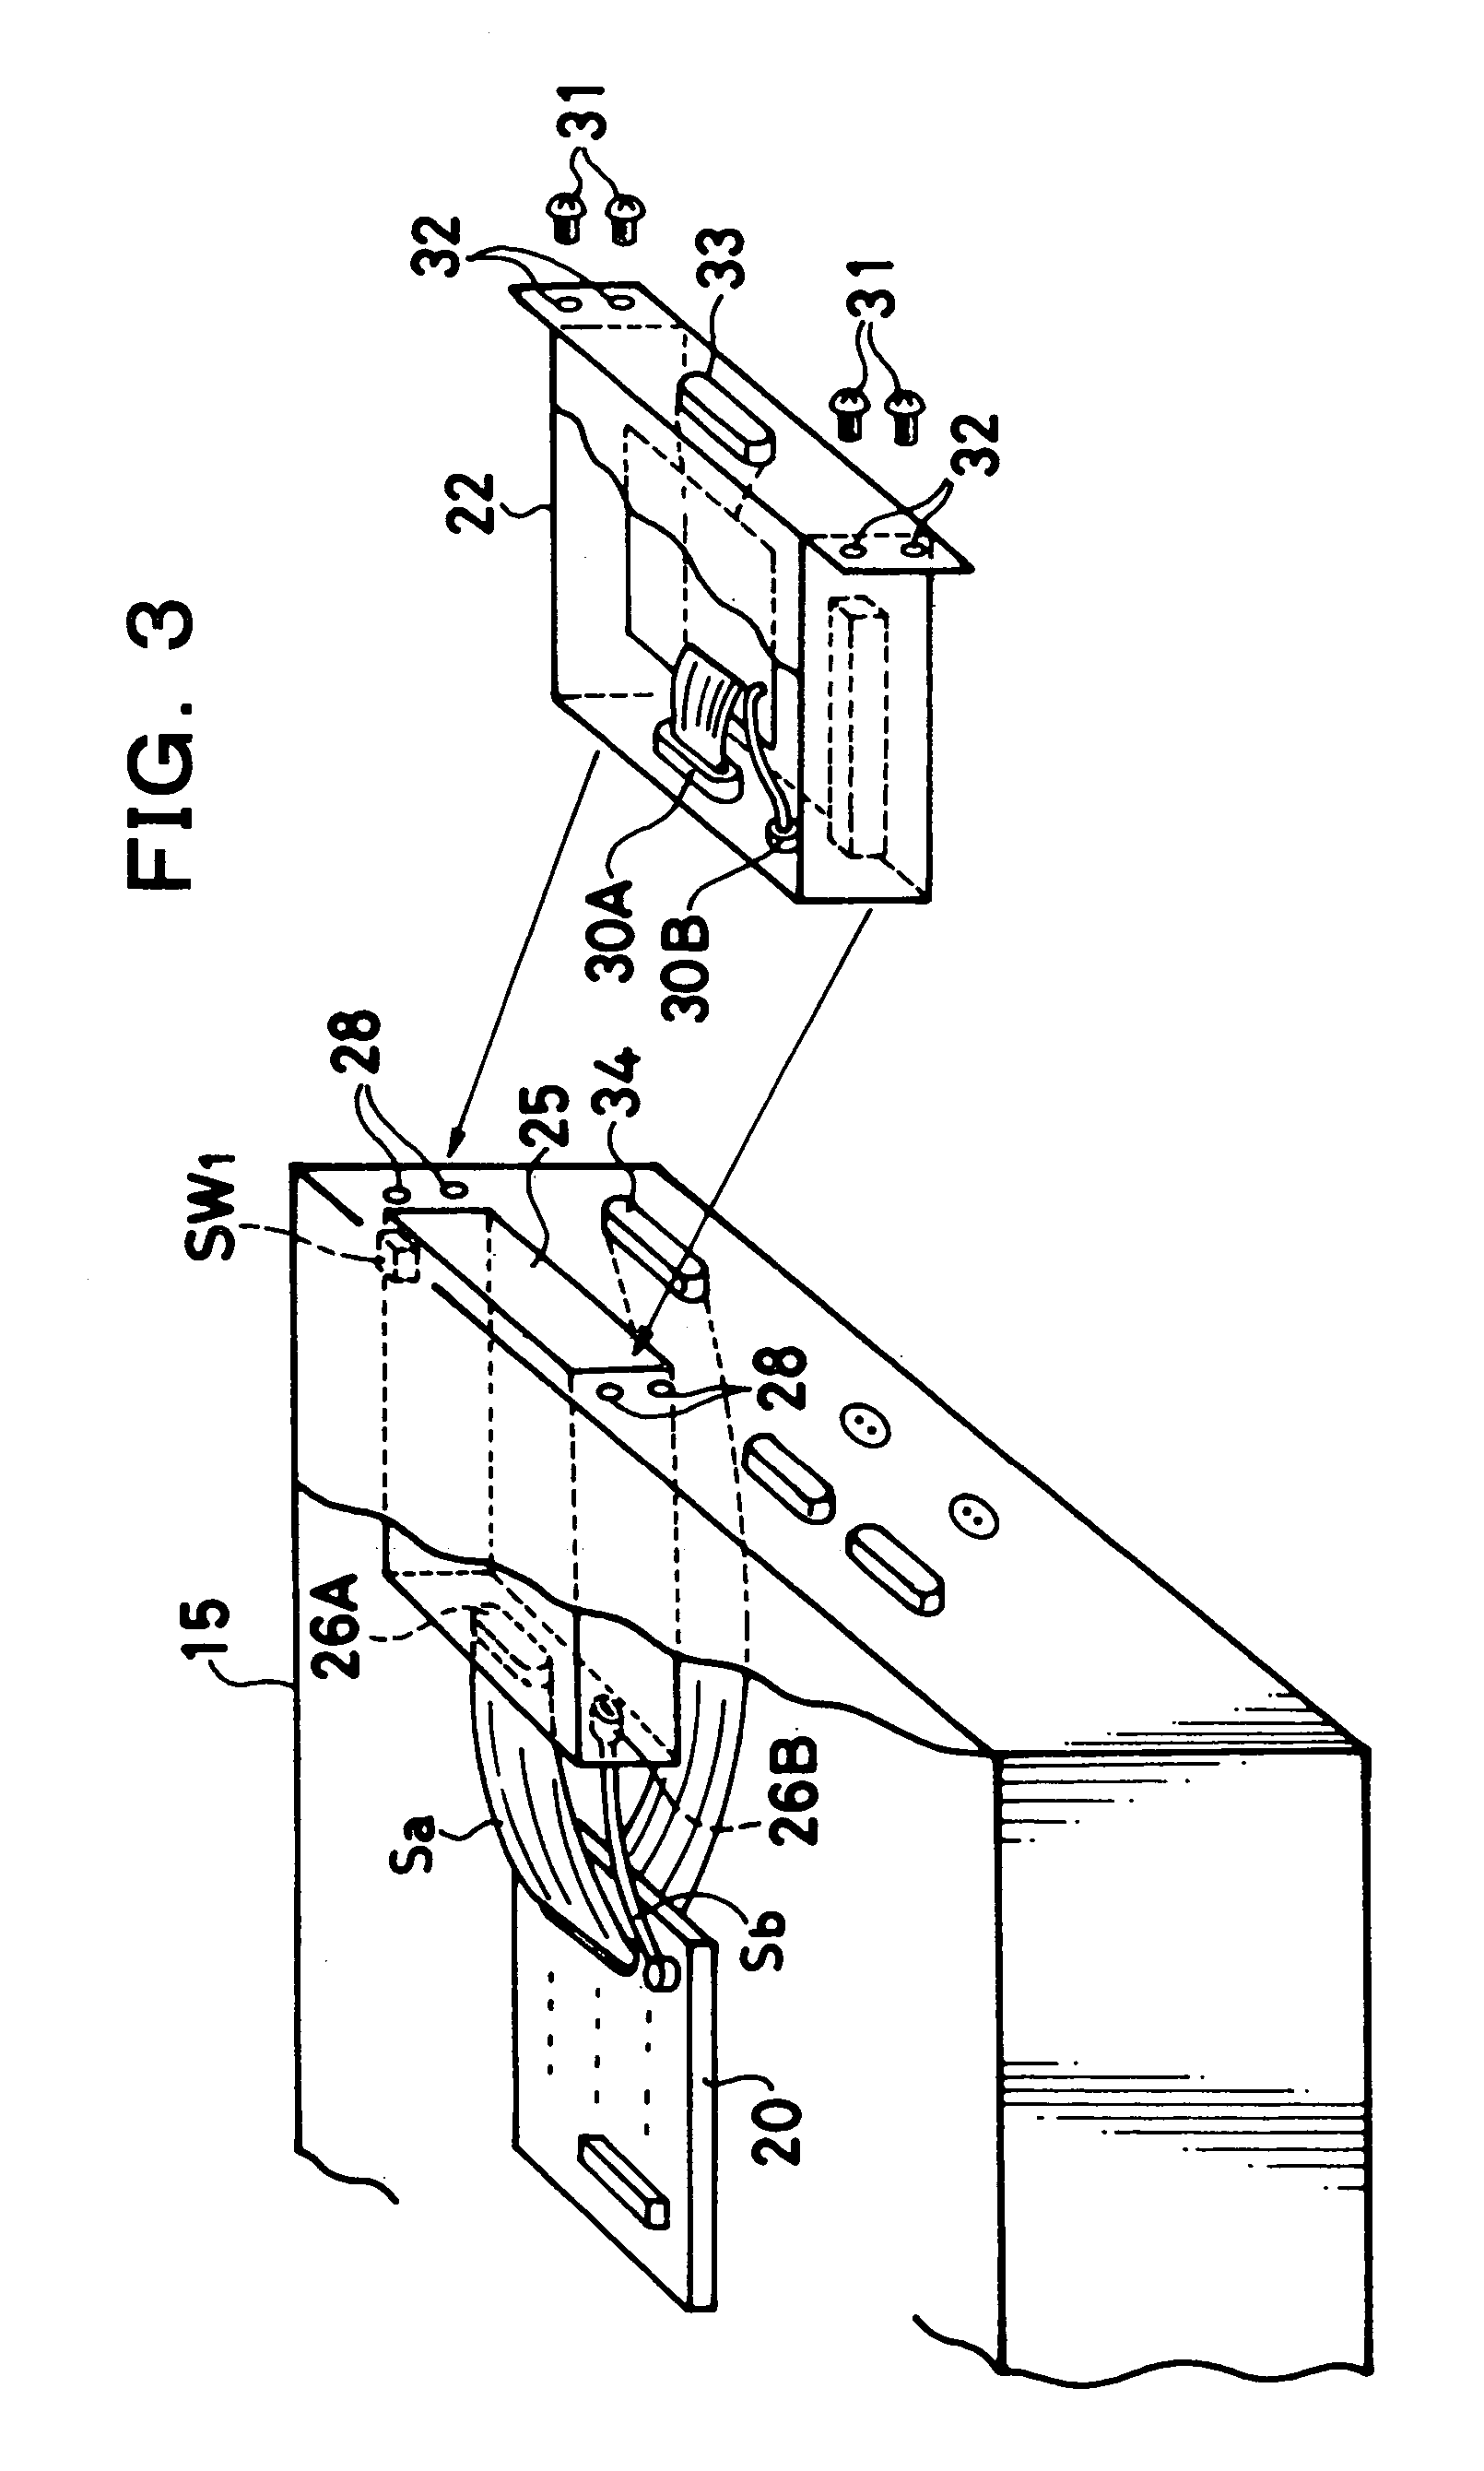 Electronic endoscope apparatus for connection to adapter unit